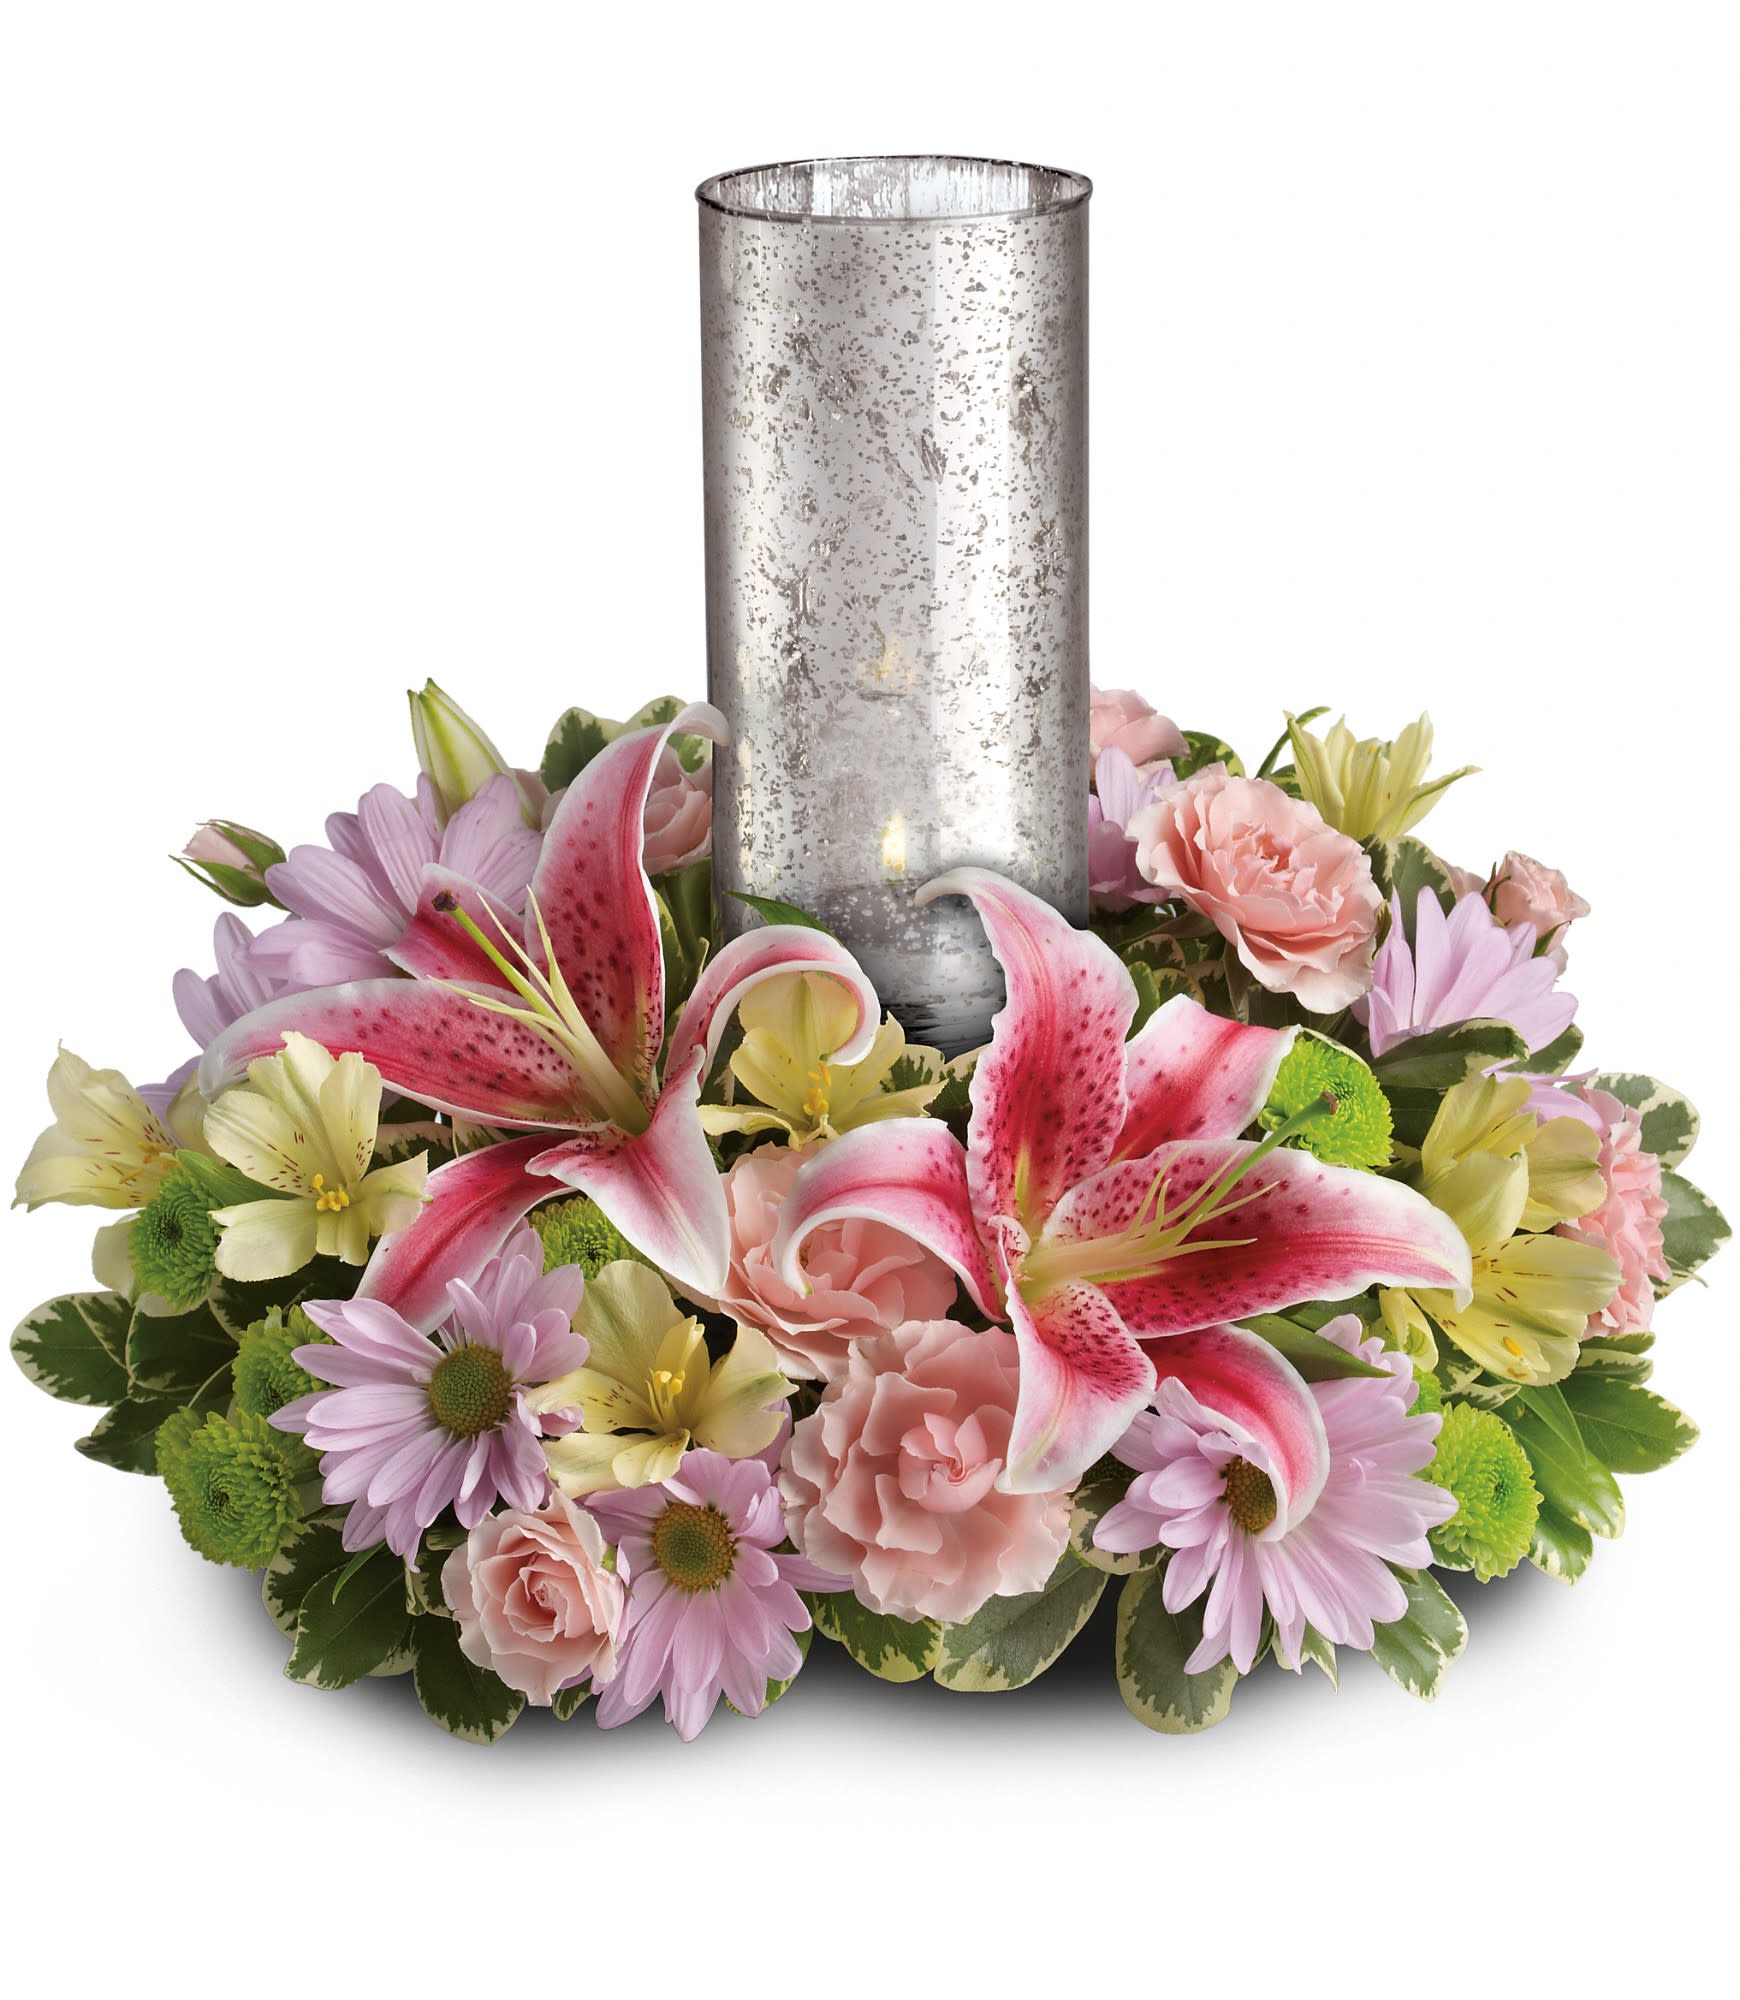 Just Delightful Centerpiece by Teleflora - Set spring aglow! Pretty pastel blooms encircle a shimmering silver glass hurricane for a centerpiece that's both sweet and chic.